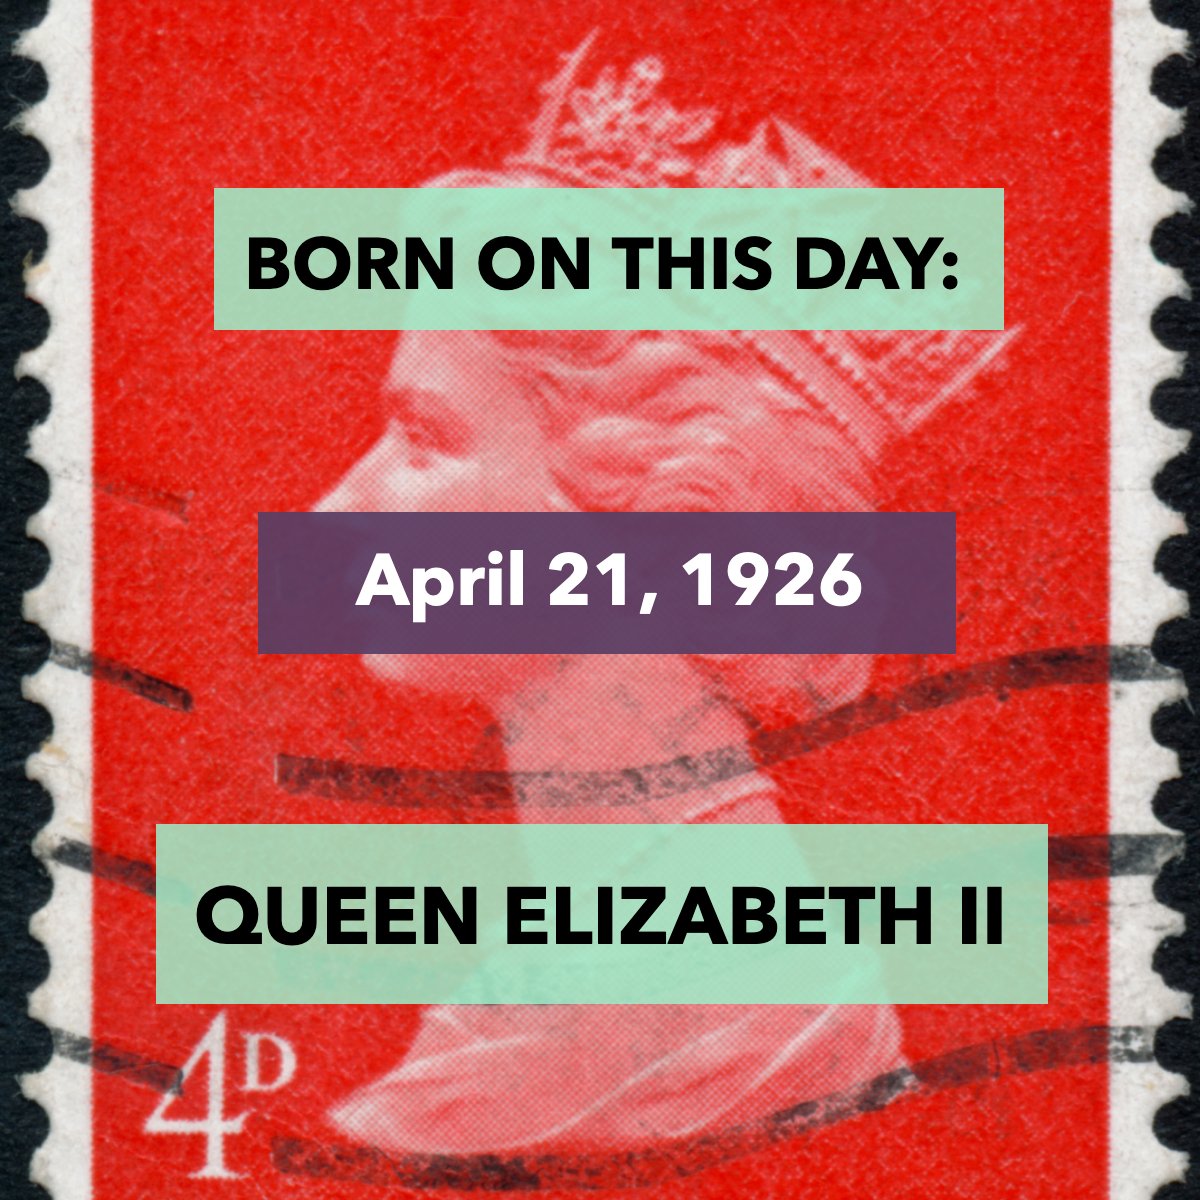 Today marks the birthday of Queen Elizabeth II

She was Britain's longest-reigning monarch

#queen👑  #borntoday #bornonthisday #famousbirthdays 
 #lannonstonerealty